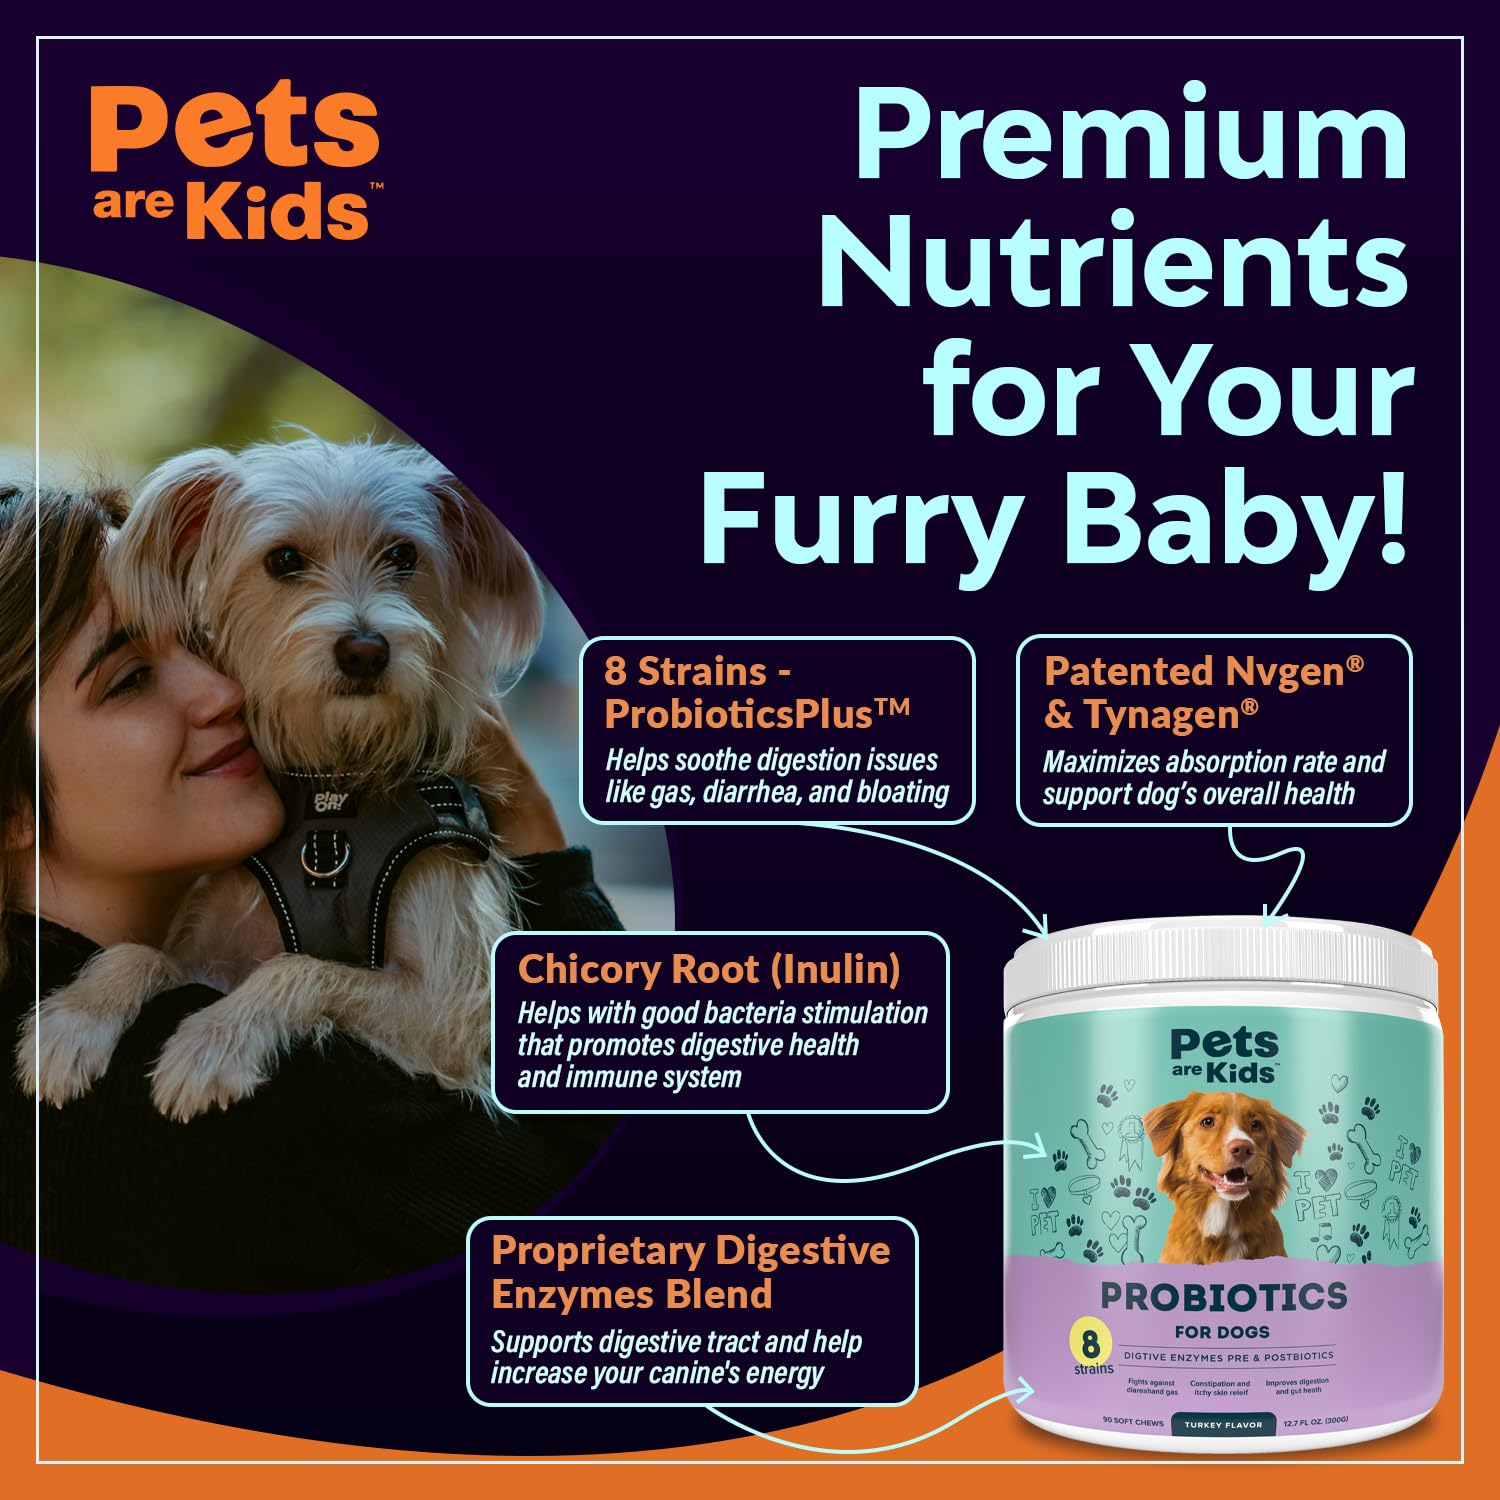 Premium nutrients for your furry baby